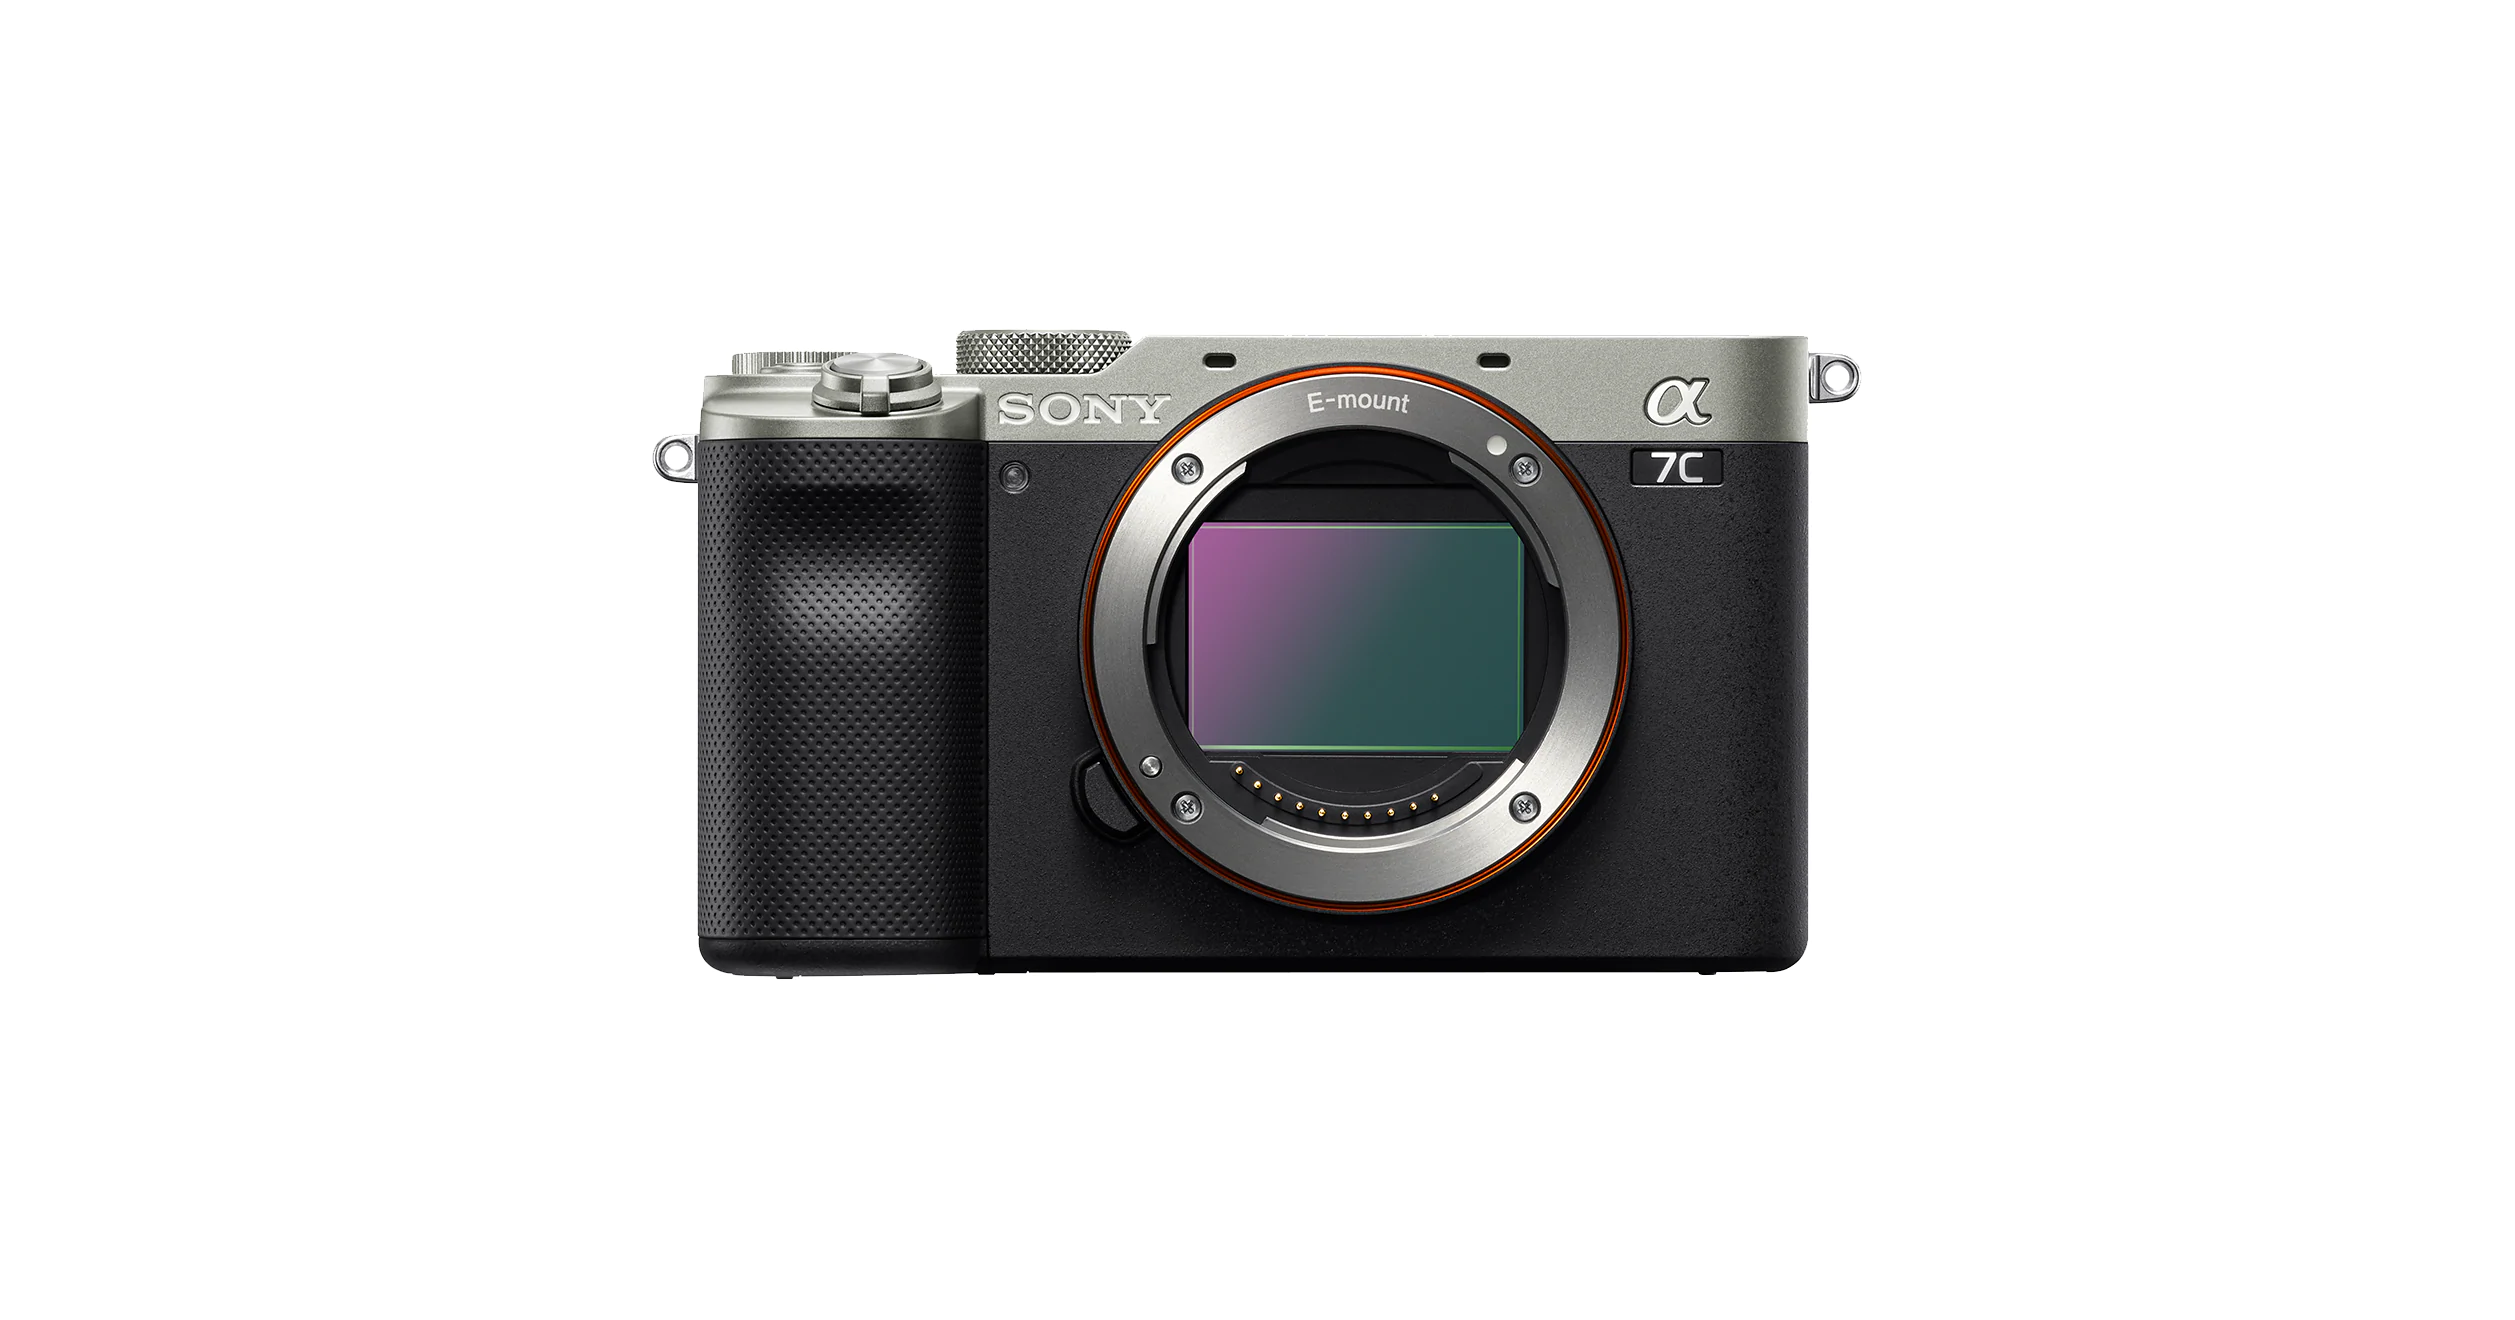 Sony A7C: Big Sensors Come in Small Packages